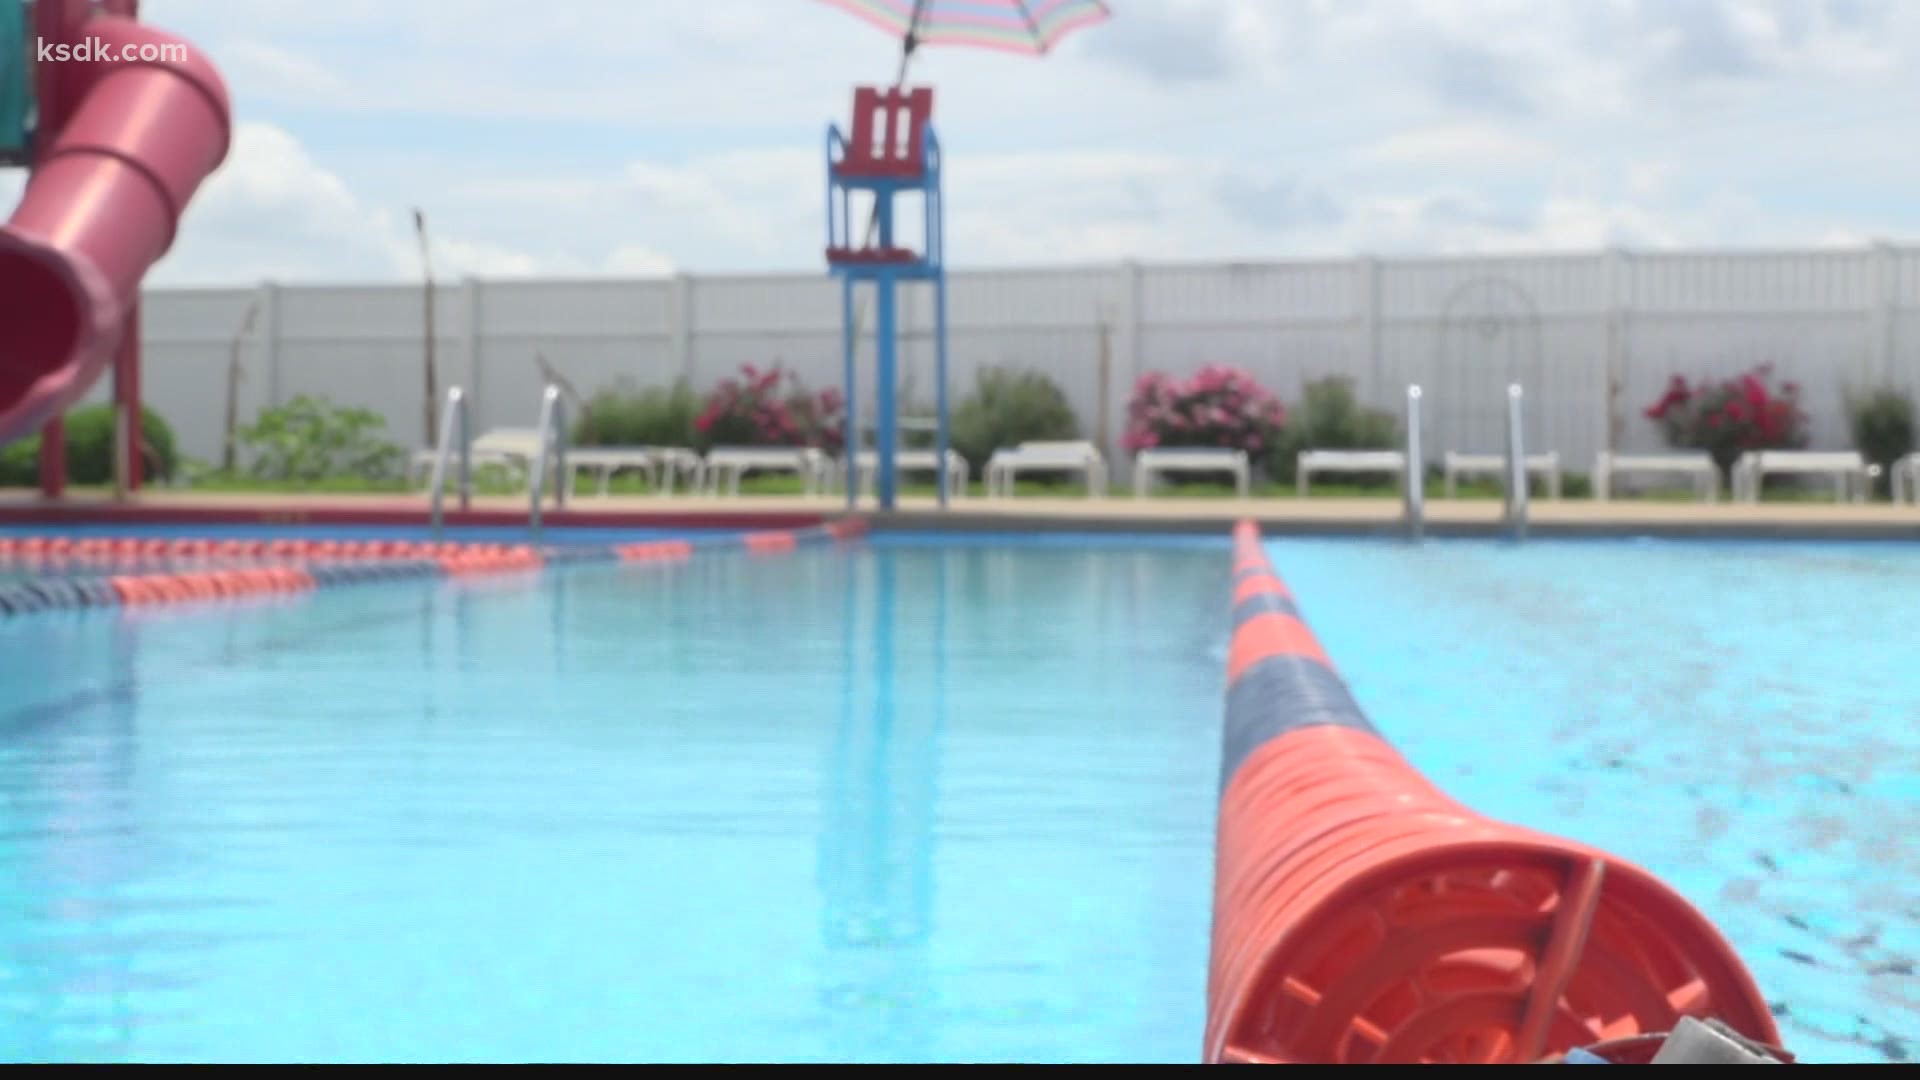 Some pools and water parks may not be able to open because they don't have enough life guards.